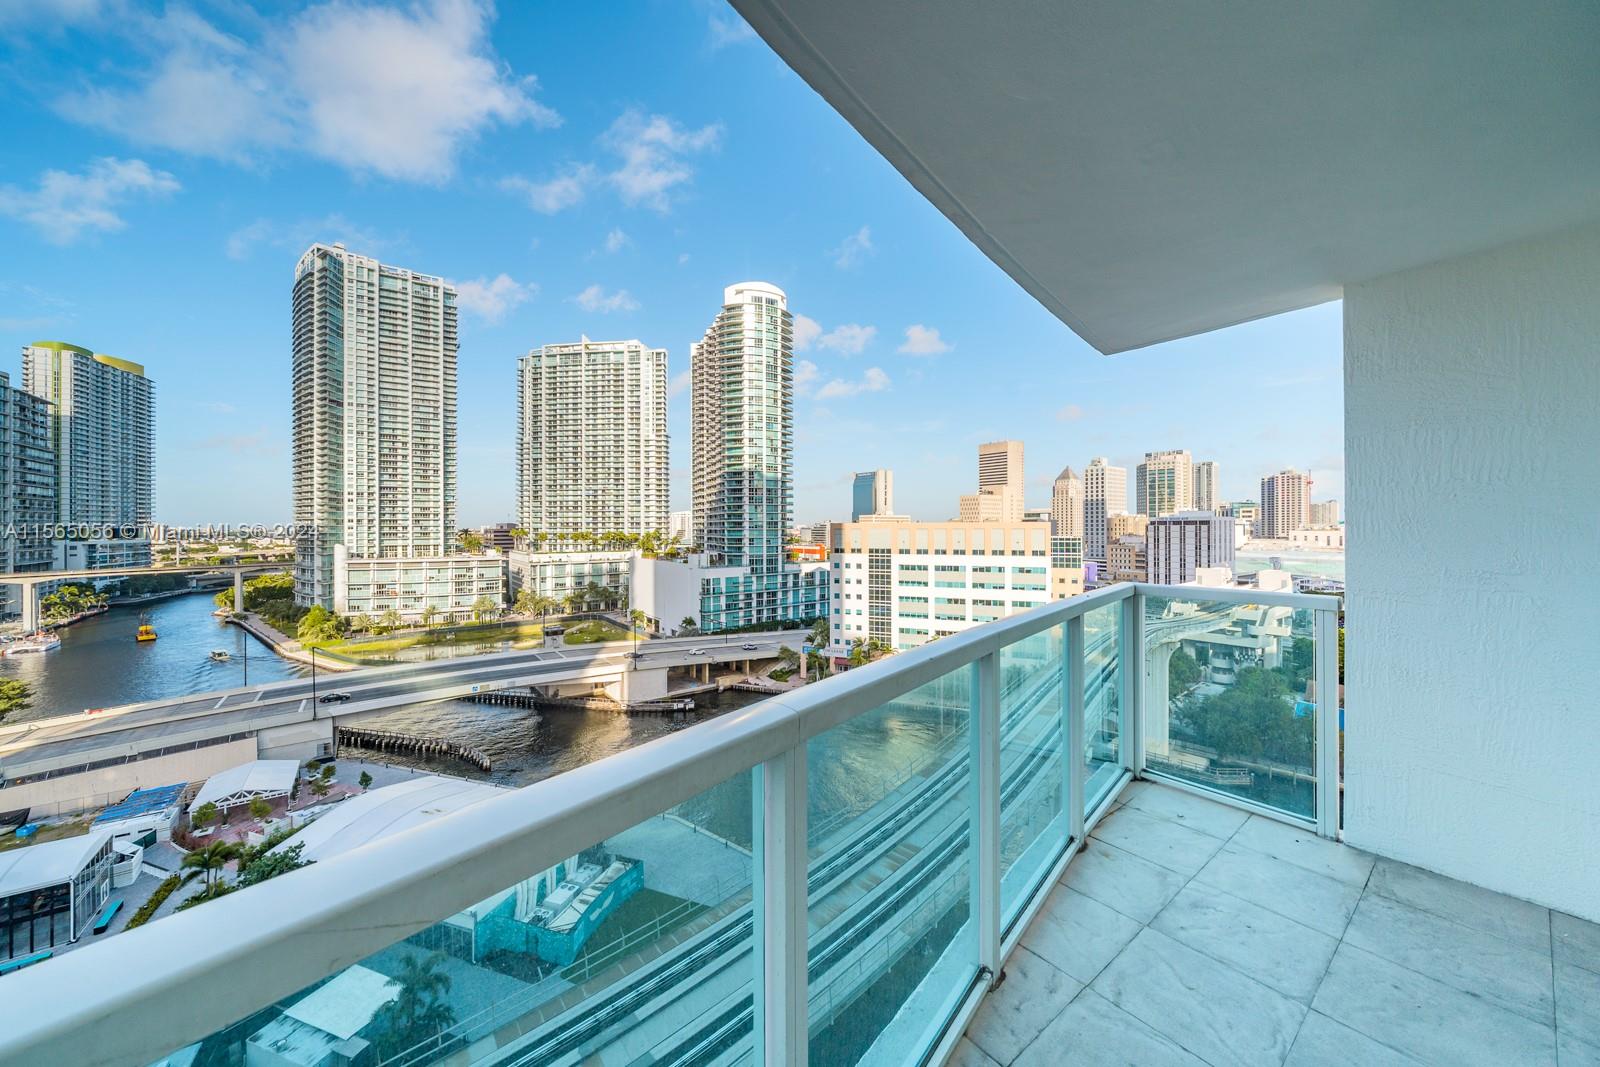 Modern 1BD / 1BA Apartment in Brickell on the River. This Apartment offers Tile floors, S/S appliances, floor-to-
ceiling glass door, balcony with a unique Brickell City Centre, Skyline, and Miami River view. Brickell on the River is centrally located in the heart of Brickell, with easy access to the metro mover and within walking distance to many restaurants, shops, and cafes.